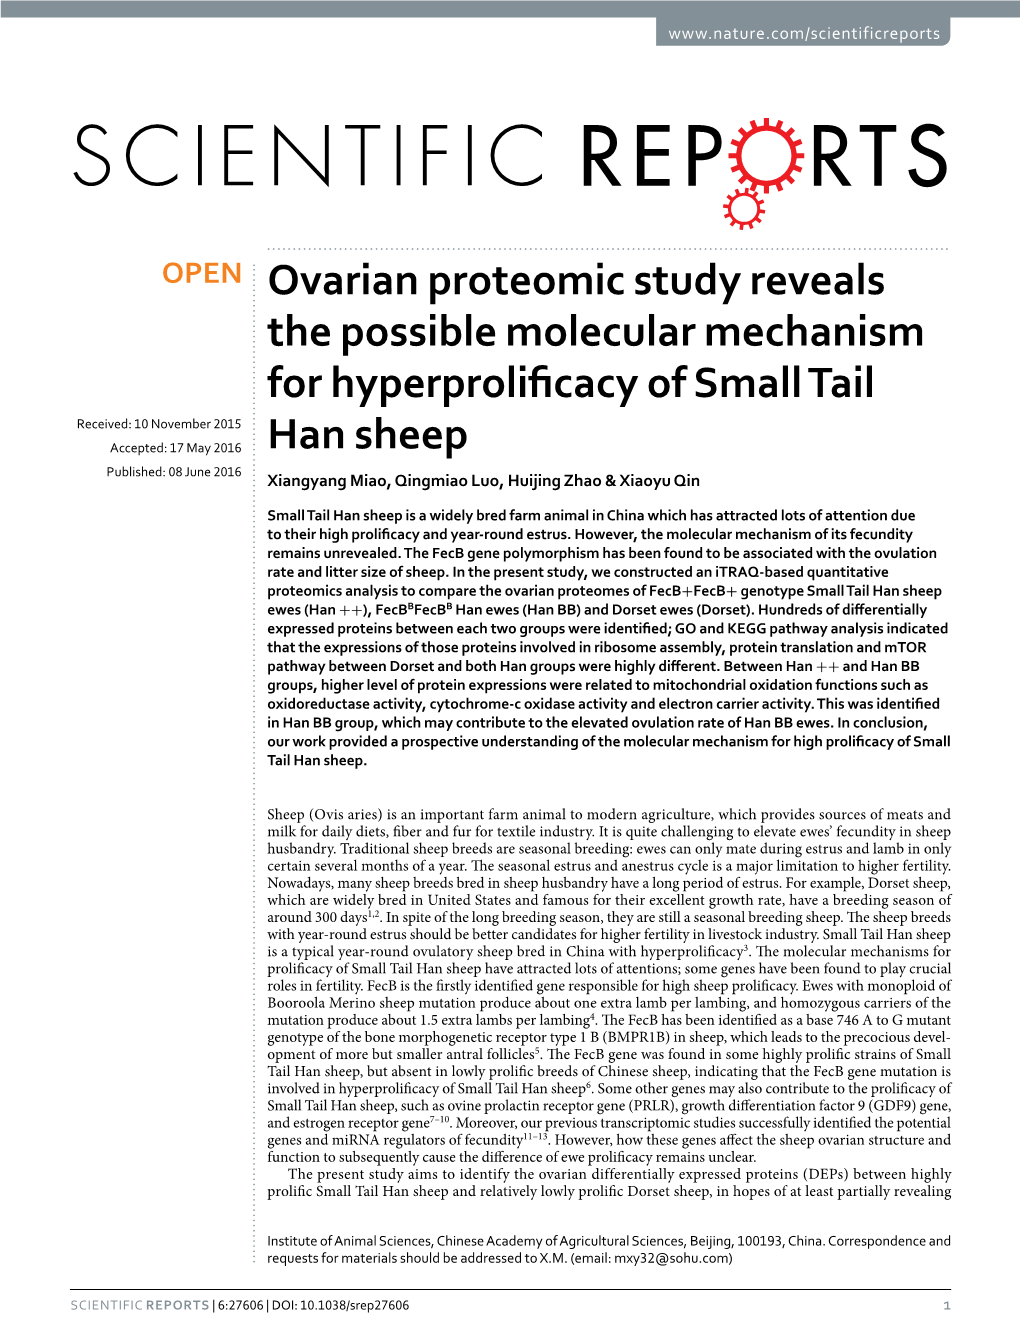 Ovarian Proteomic Study Reveals the Possible Molecular Mechanism For